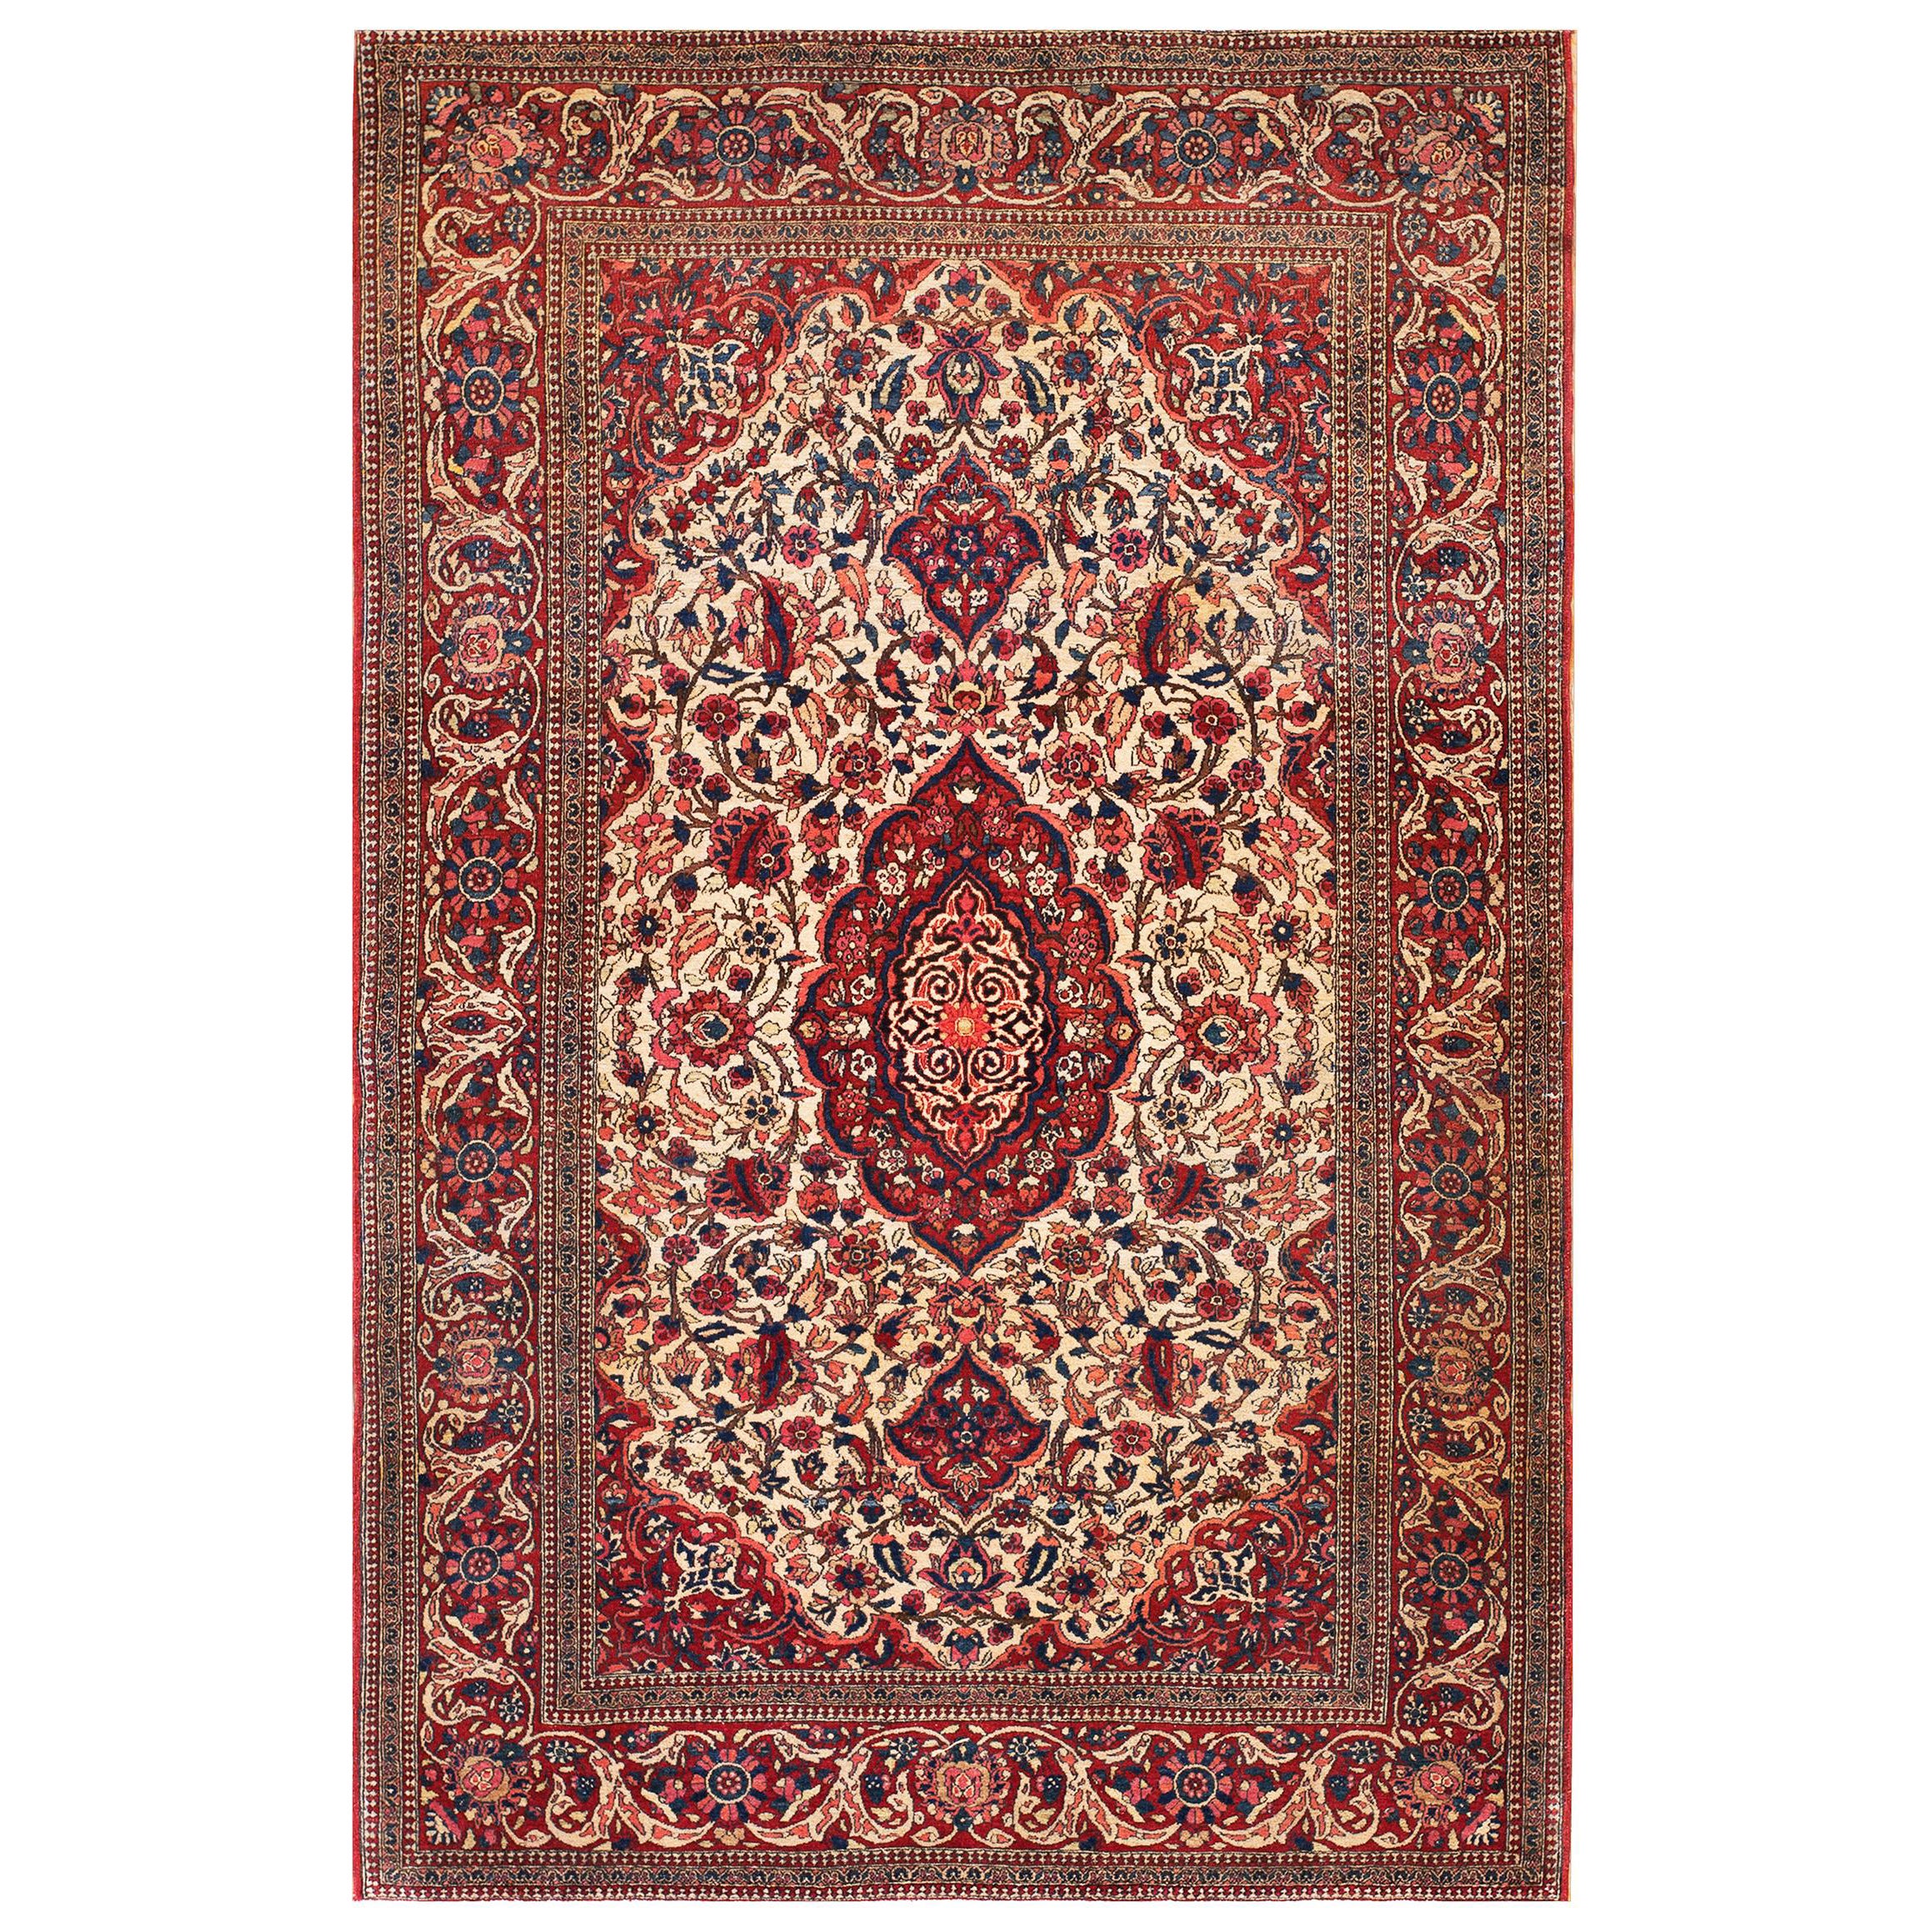 Early 20th Century Persian Isfahan Carpet ( 4'8" x 6'10" - 143 x 208 ) For Sale